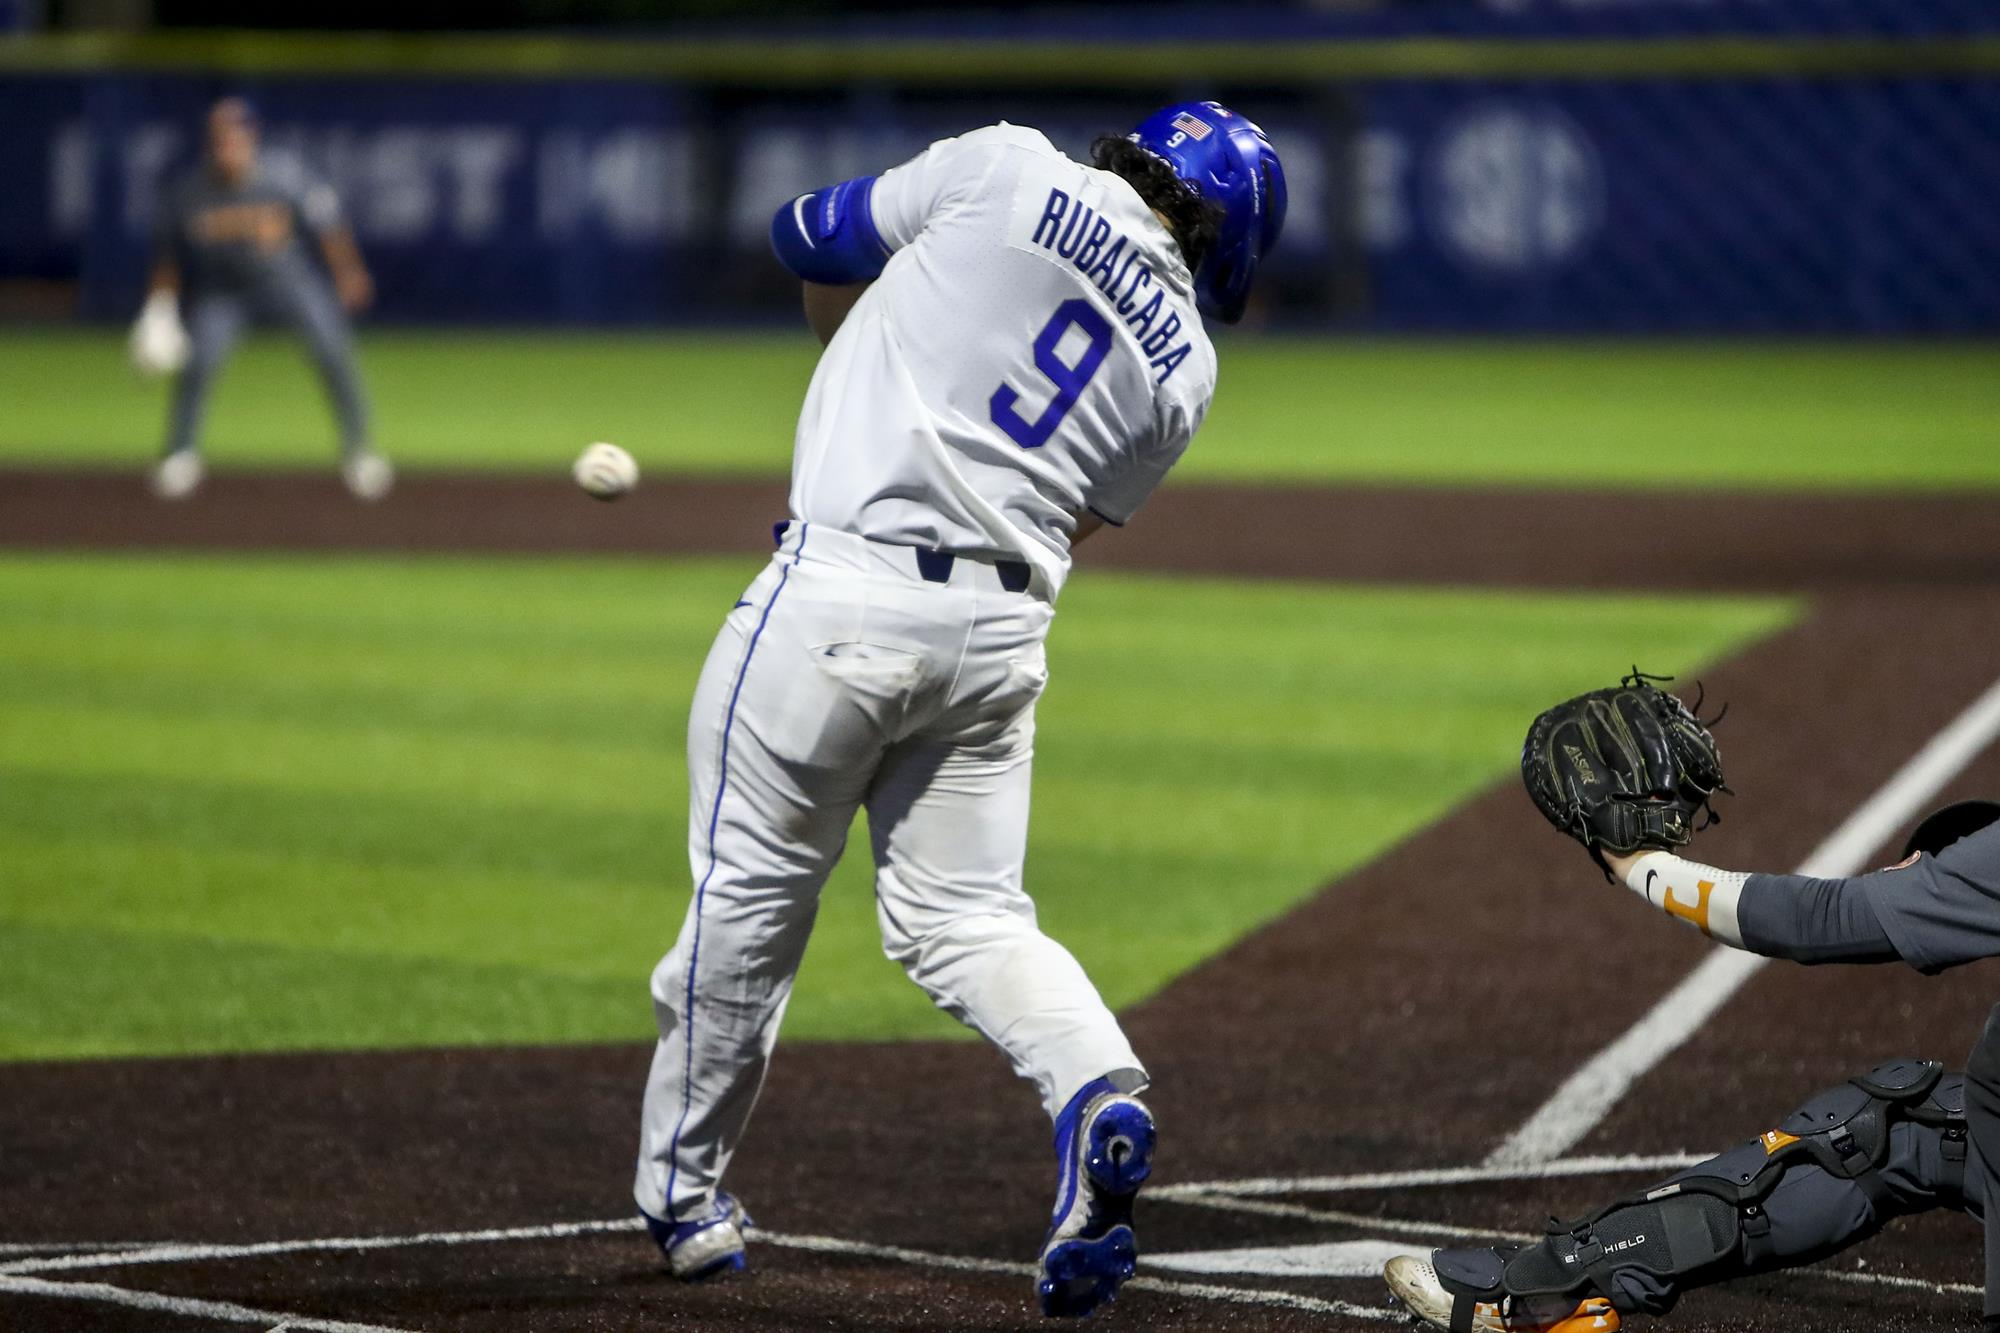 Late Night With The Cats: Kentucky Outlasts No. 1 Tennessee